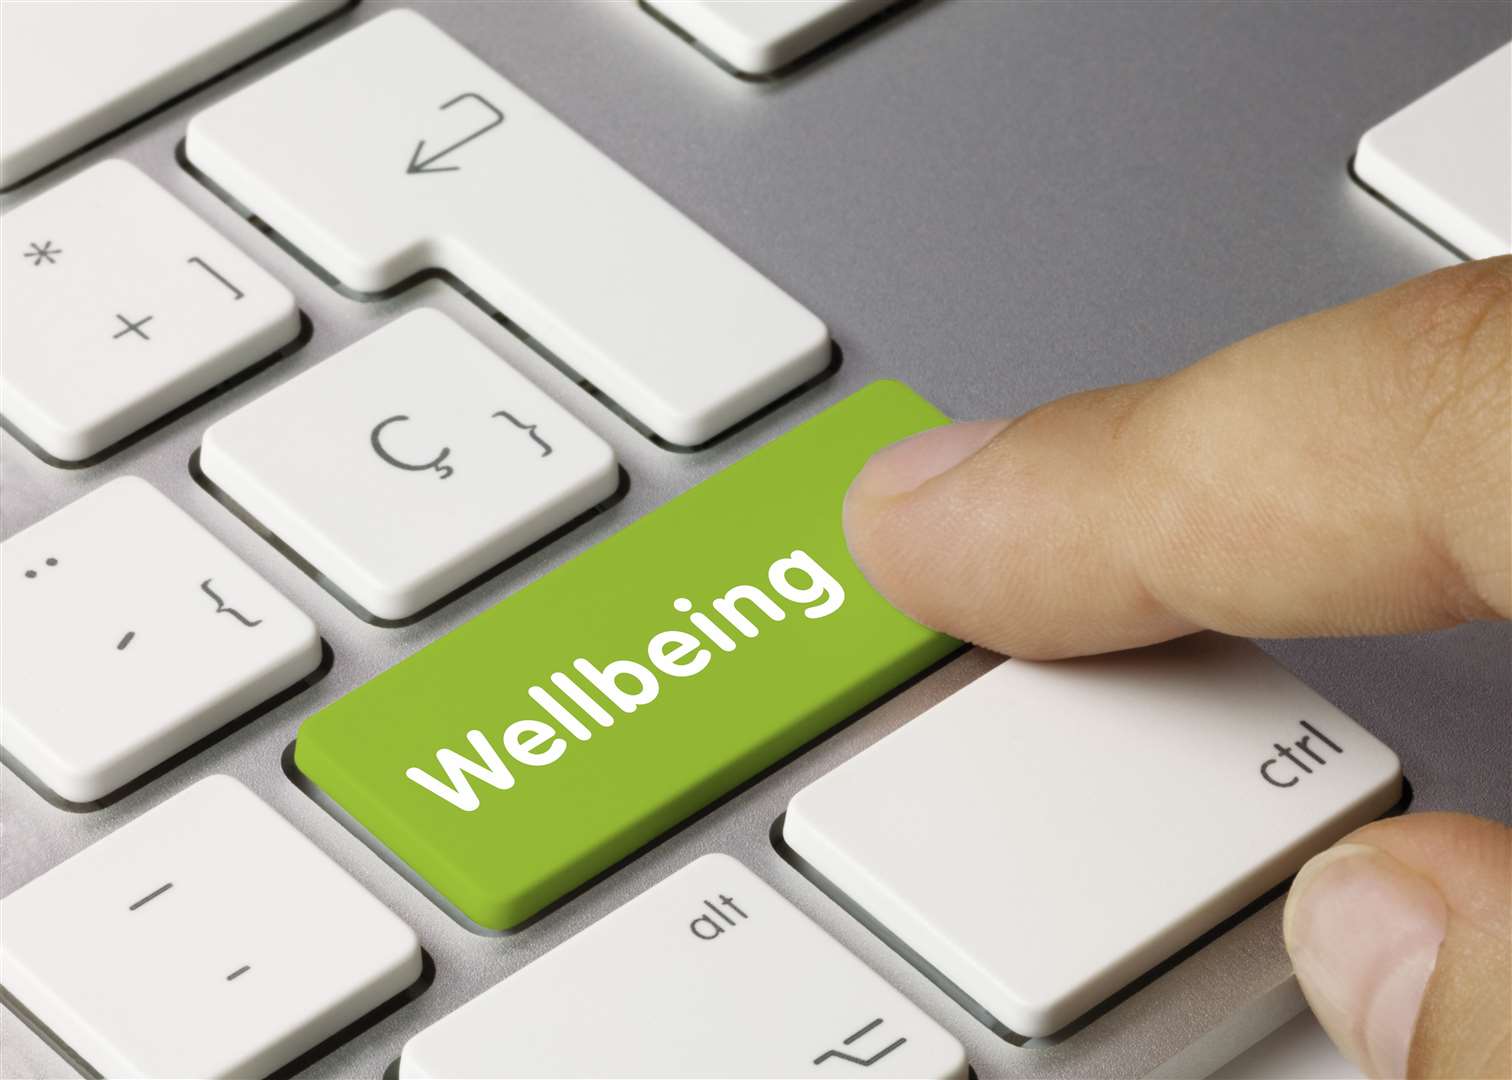 The new wellbeing website was launched today.